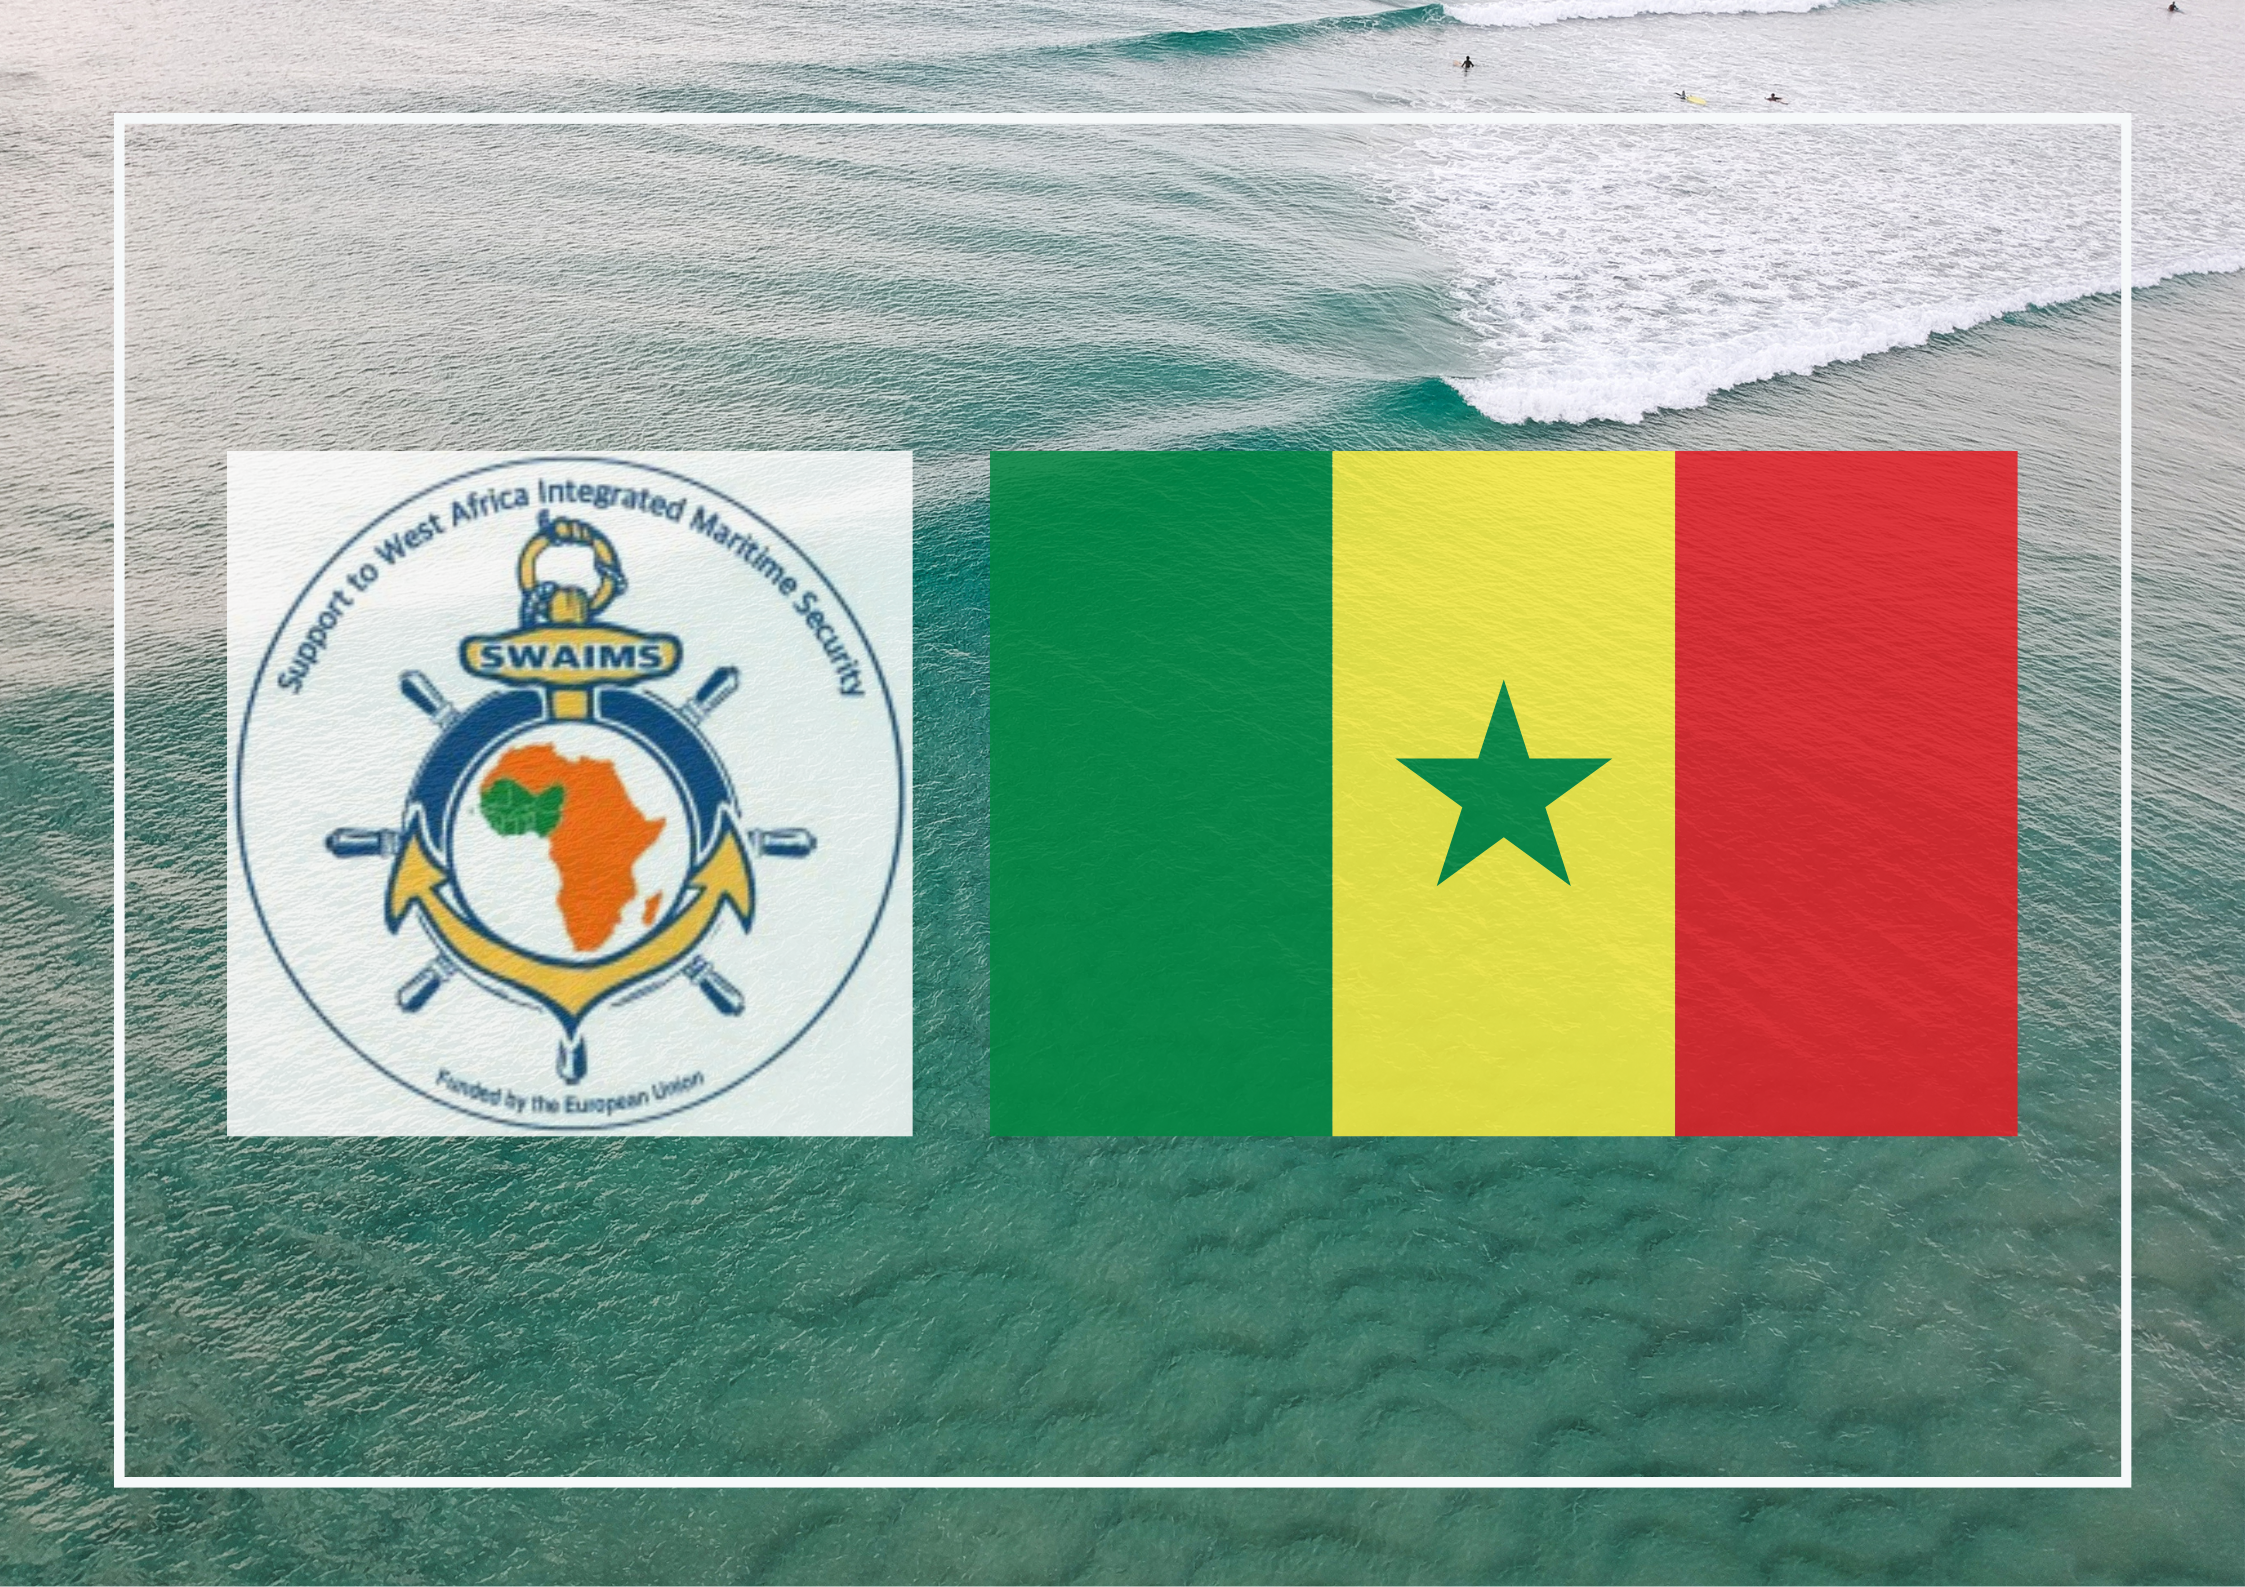 Signature of a Memorandum of Understanding with the Republic of Senegal SWAIMS – Operational Response and Management of the Rule of Law at Sea